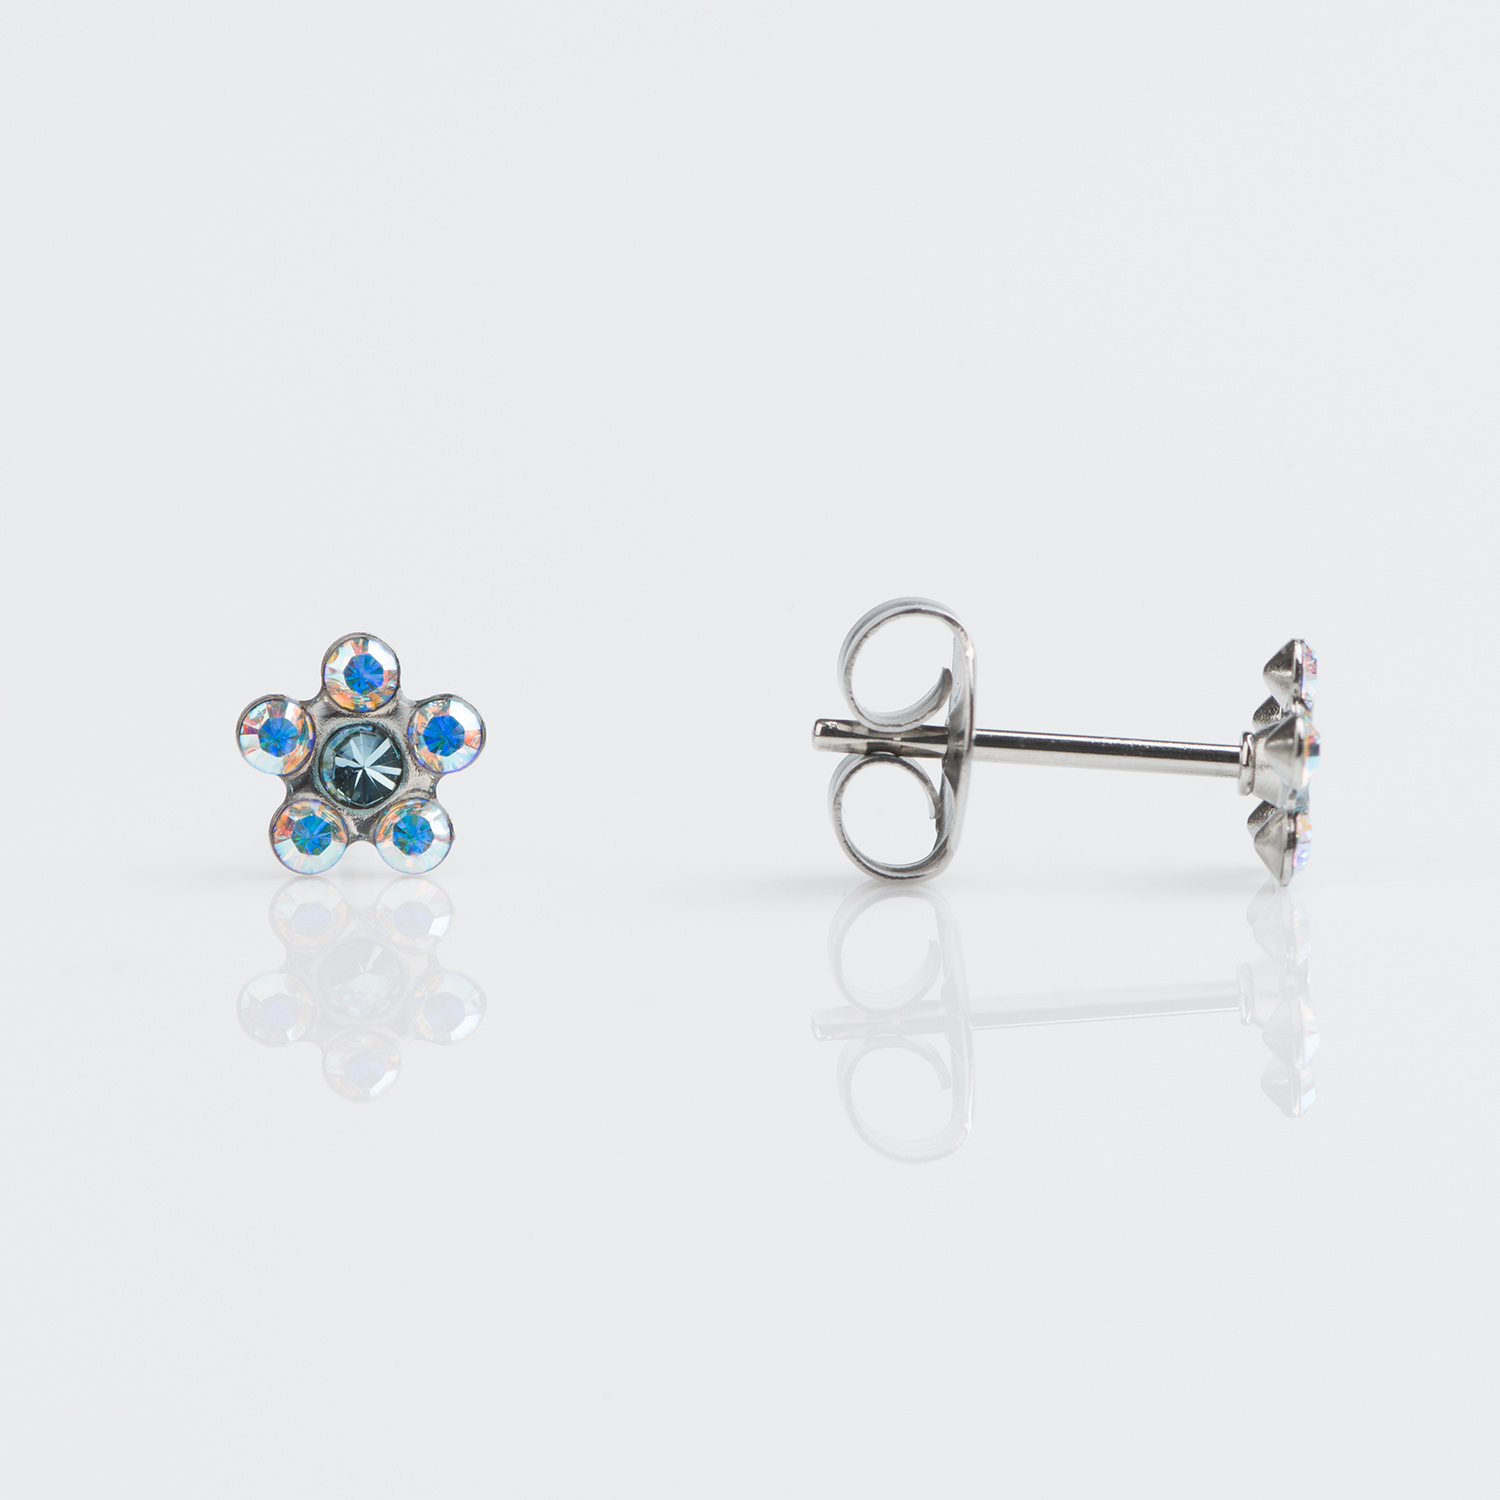 Studex Tiny Tips Stainless Daisy AB Crystal March Aquamarine Stud Earrings